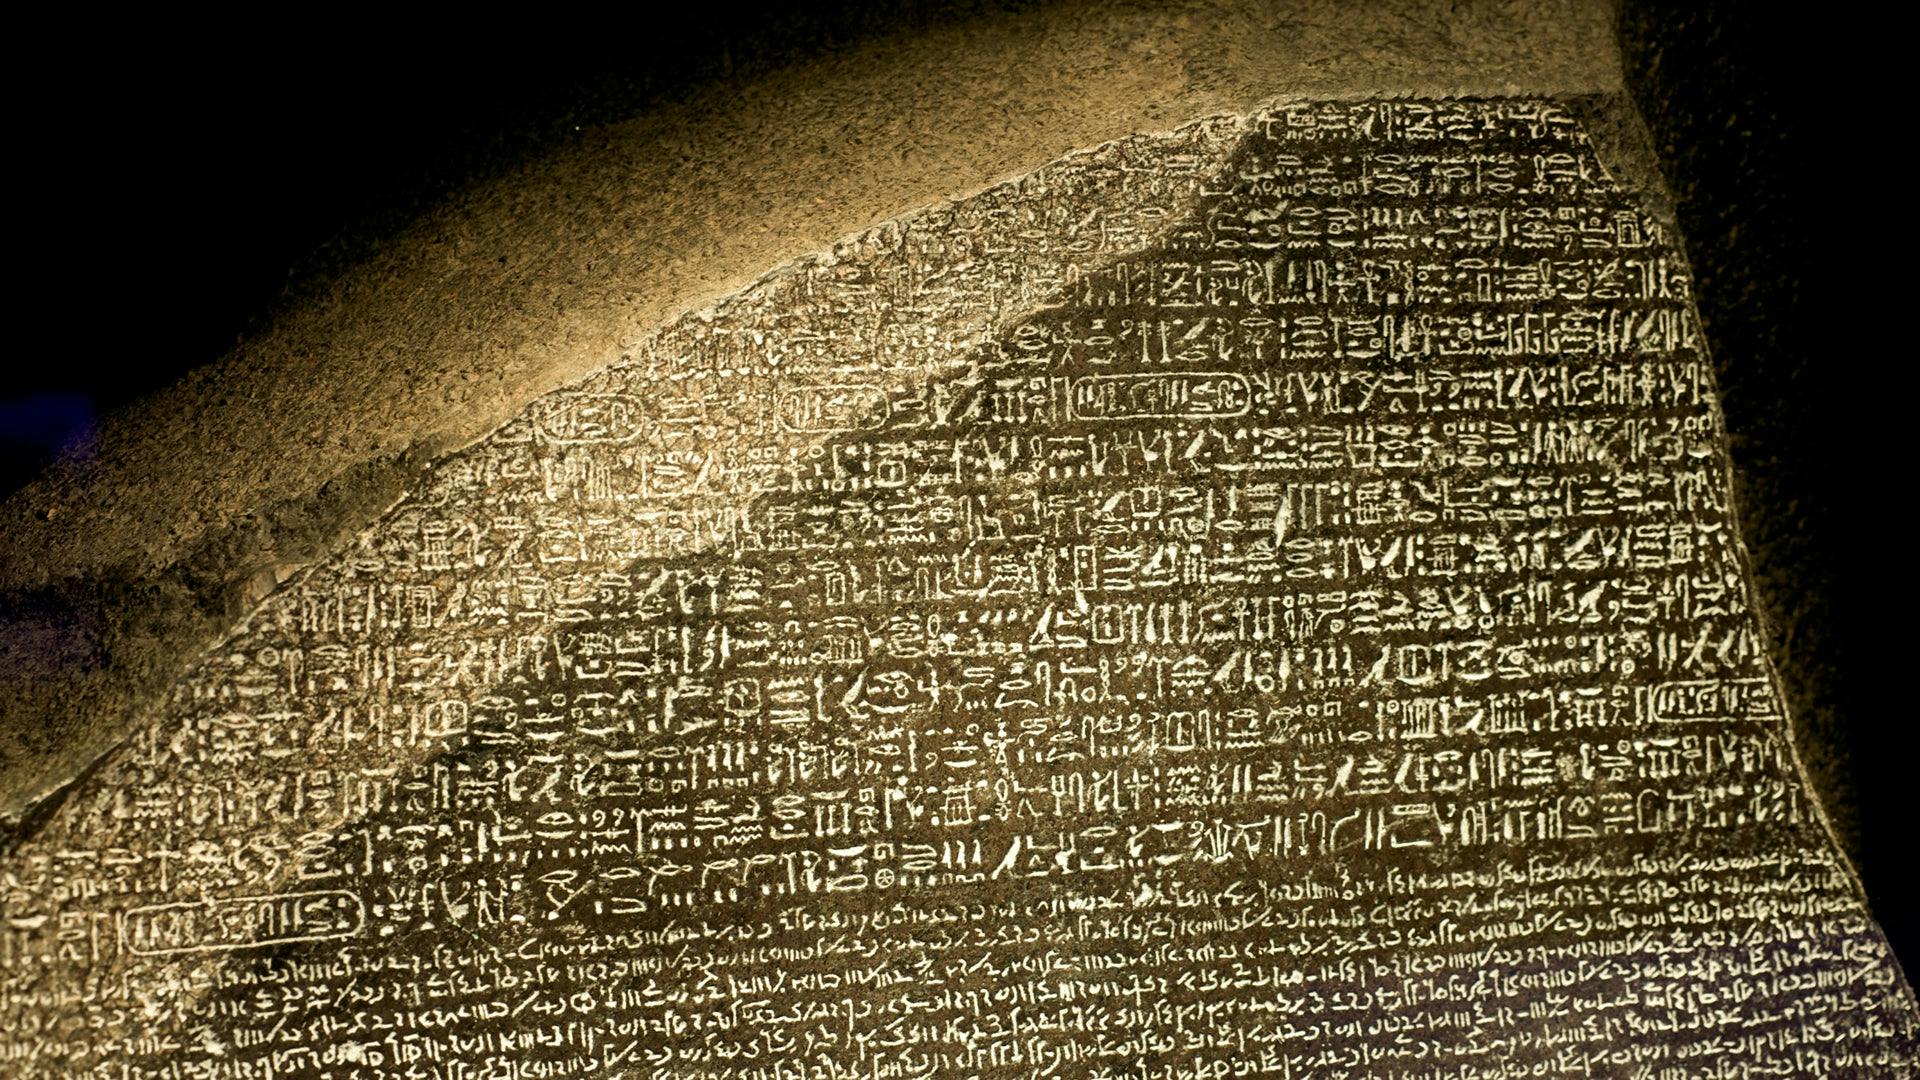 The Rosetta Stone: Discovery and Significance (Biblical Archaeology)